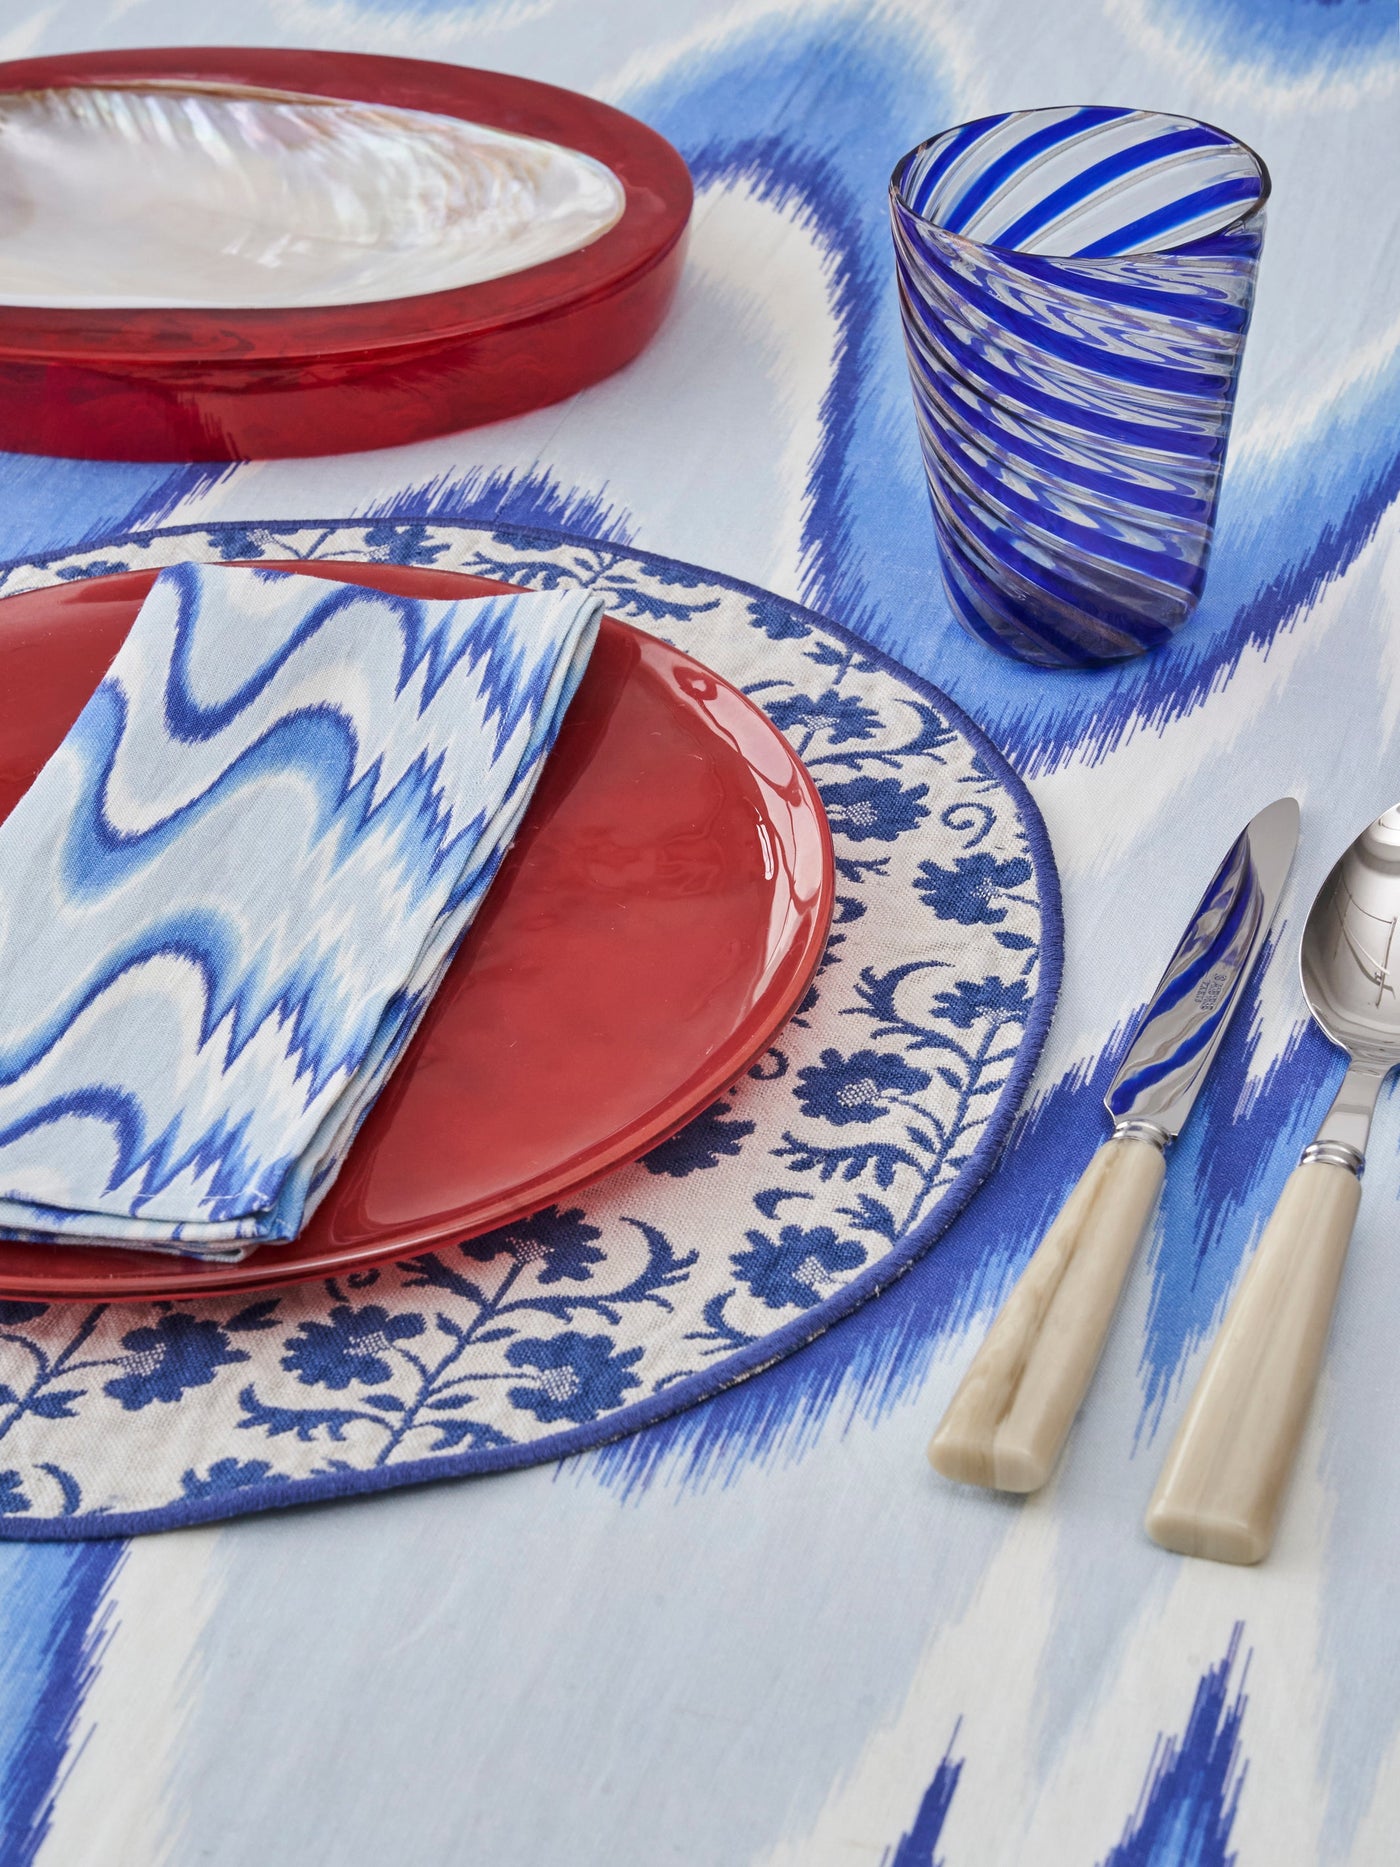 Aurora Flamestitch Tablecloth 260 cm and Napkins in Blue by Permanent Resident Suzani Placemat Sabre Nature Flatware Swirl Murano Glass Red Glass Dishware 